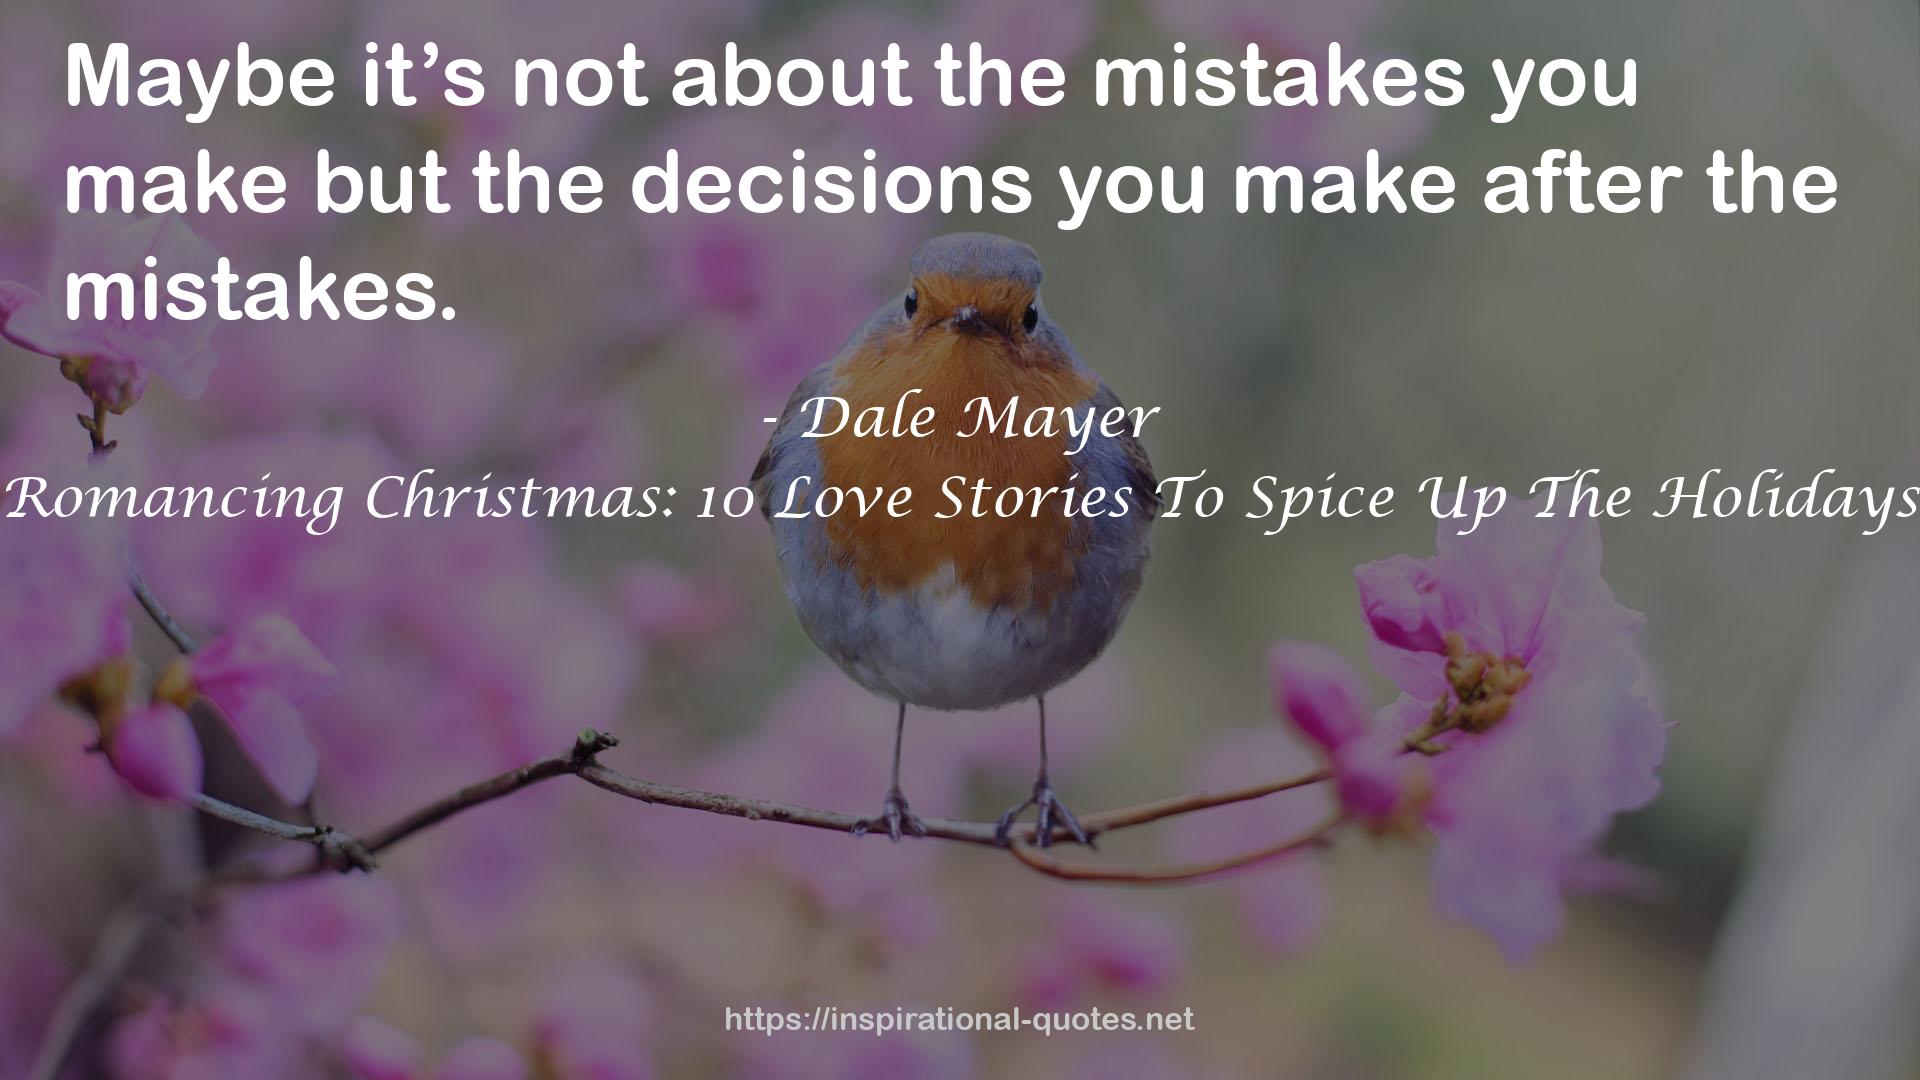 Romancing Christmas: 10 Love Stories To Spice Up The Holidays QUOTES